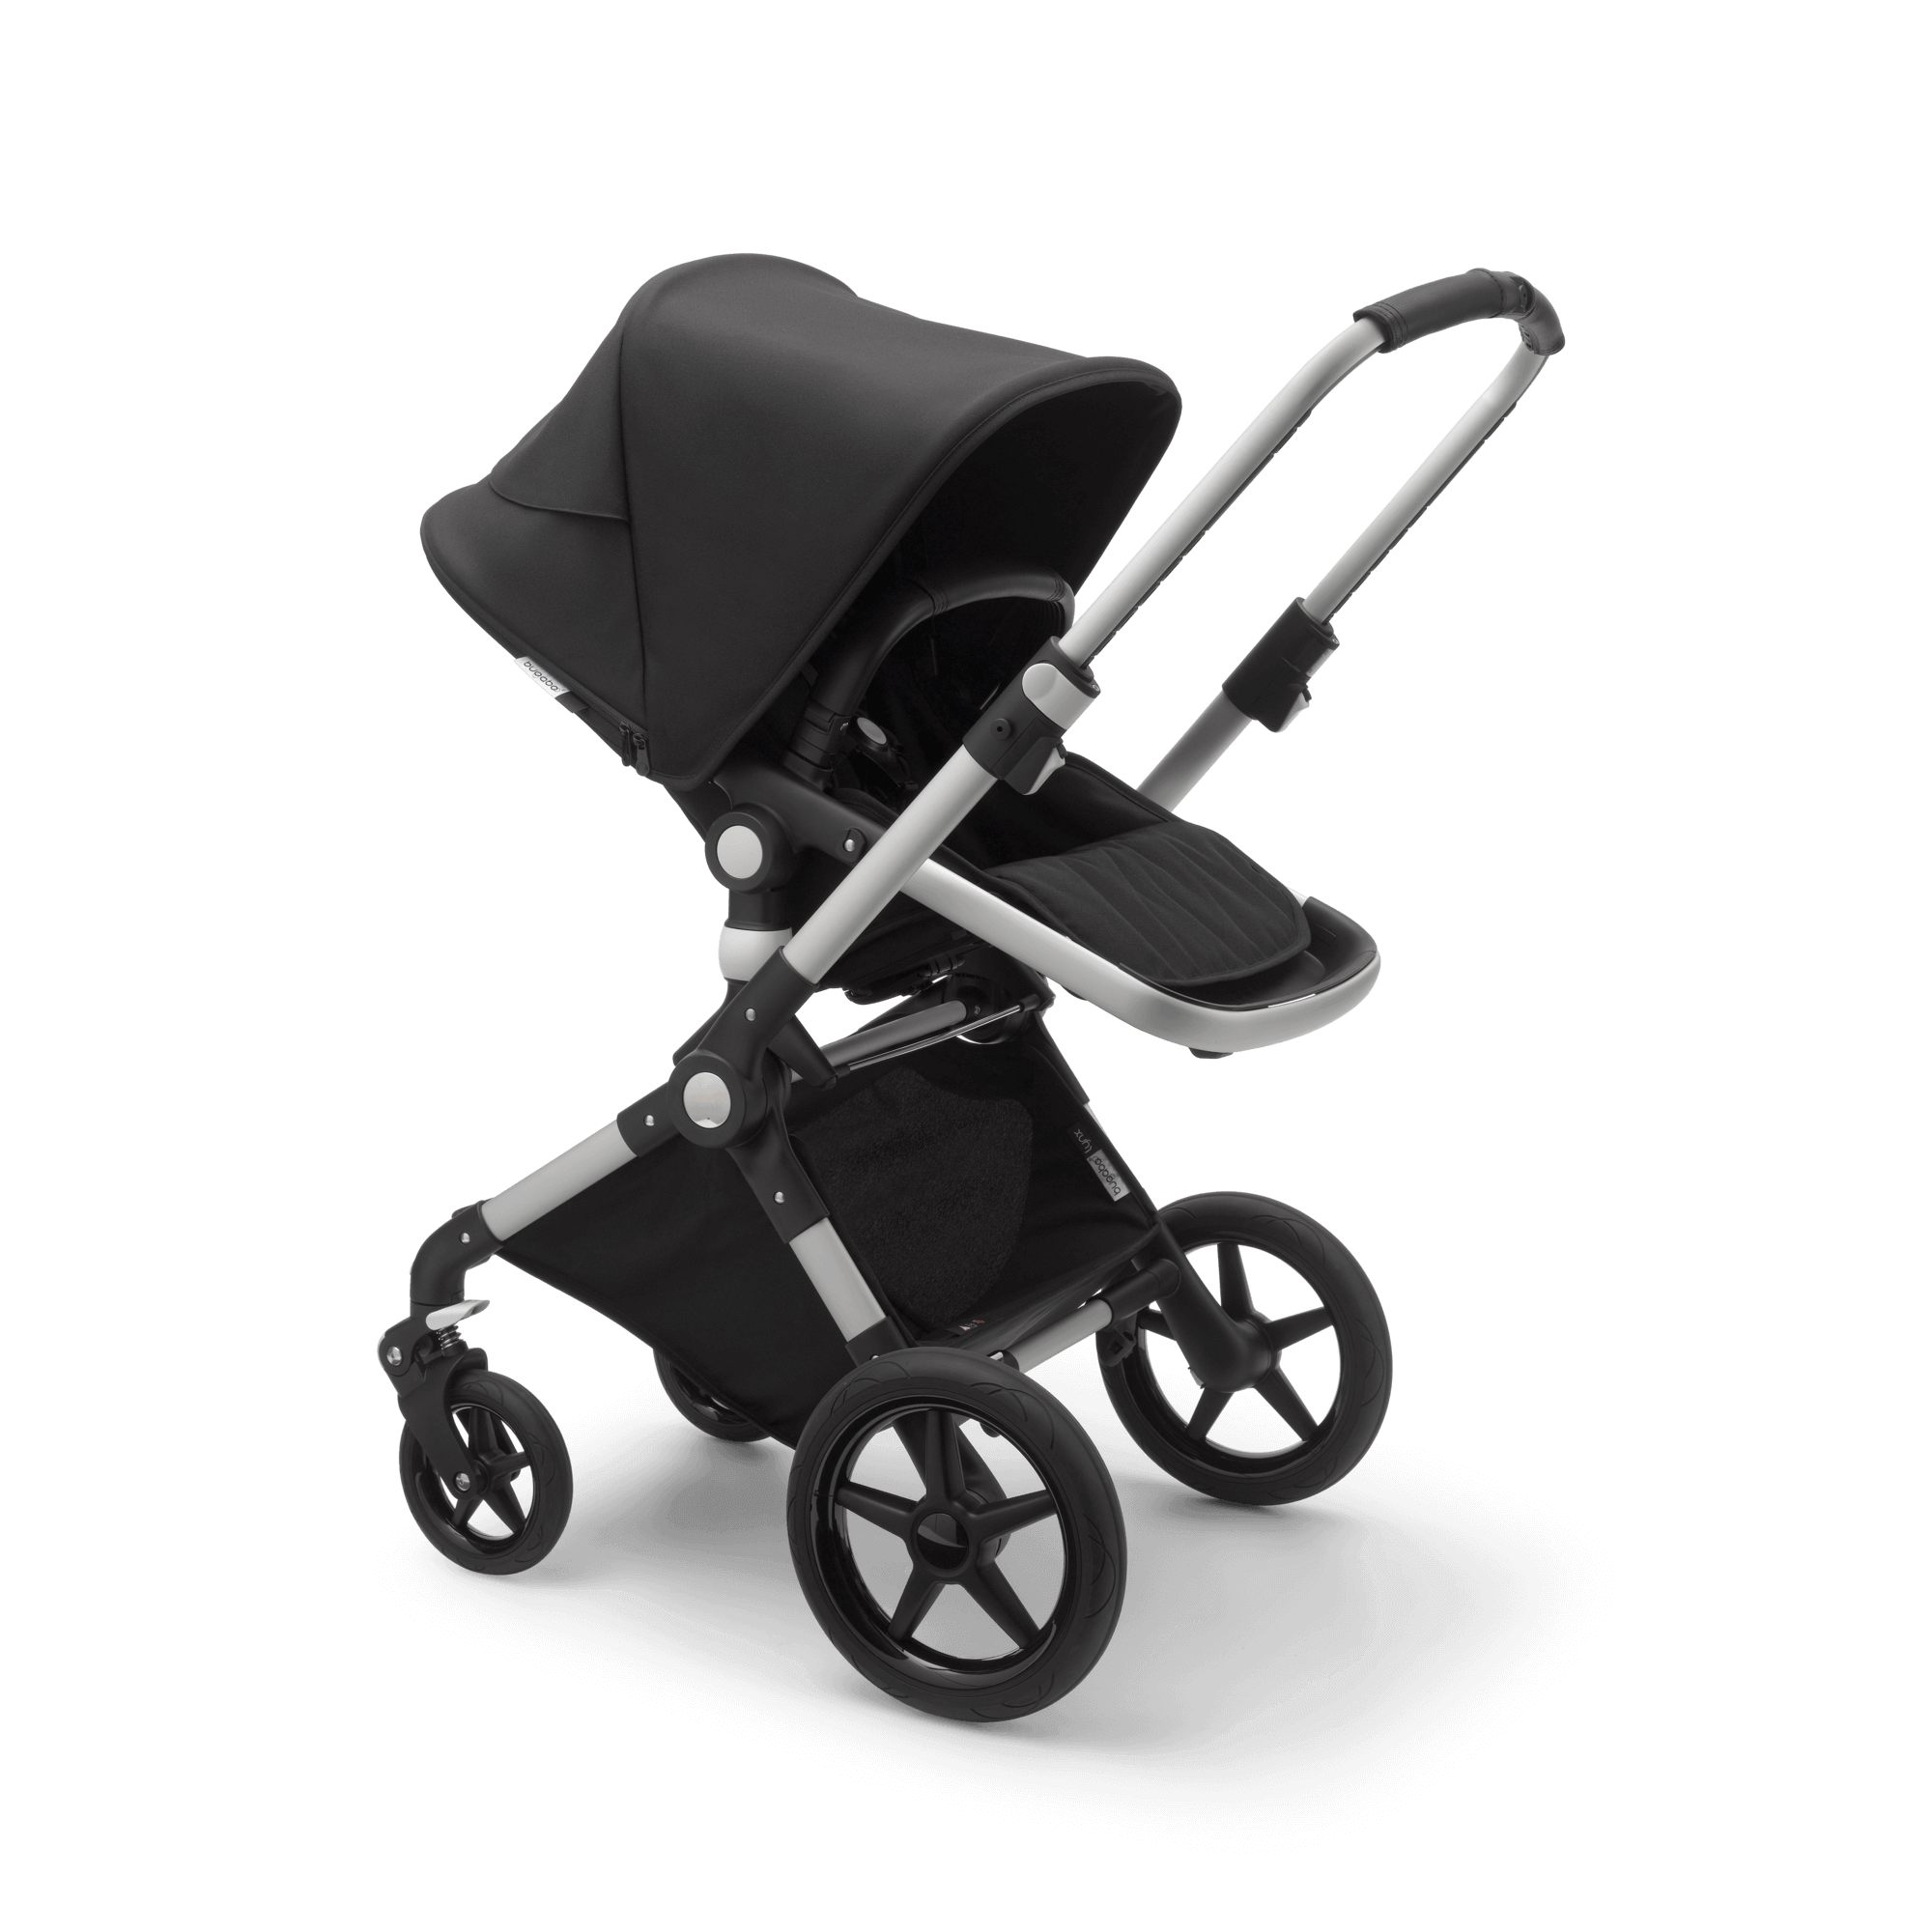 Bugaboo Cameleon 3 Plus Sit and stand stroller Black sun canopy, black  fabrics, aluminum chassis